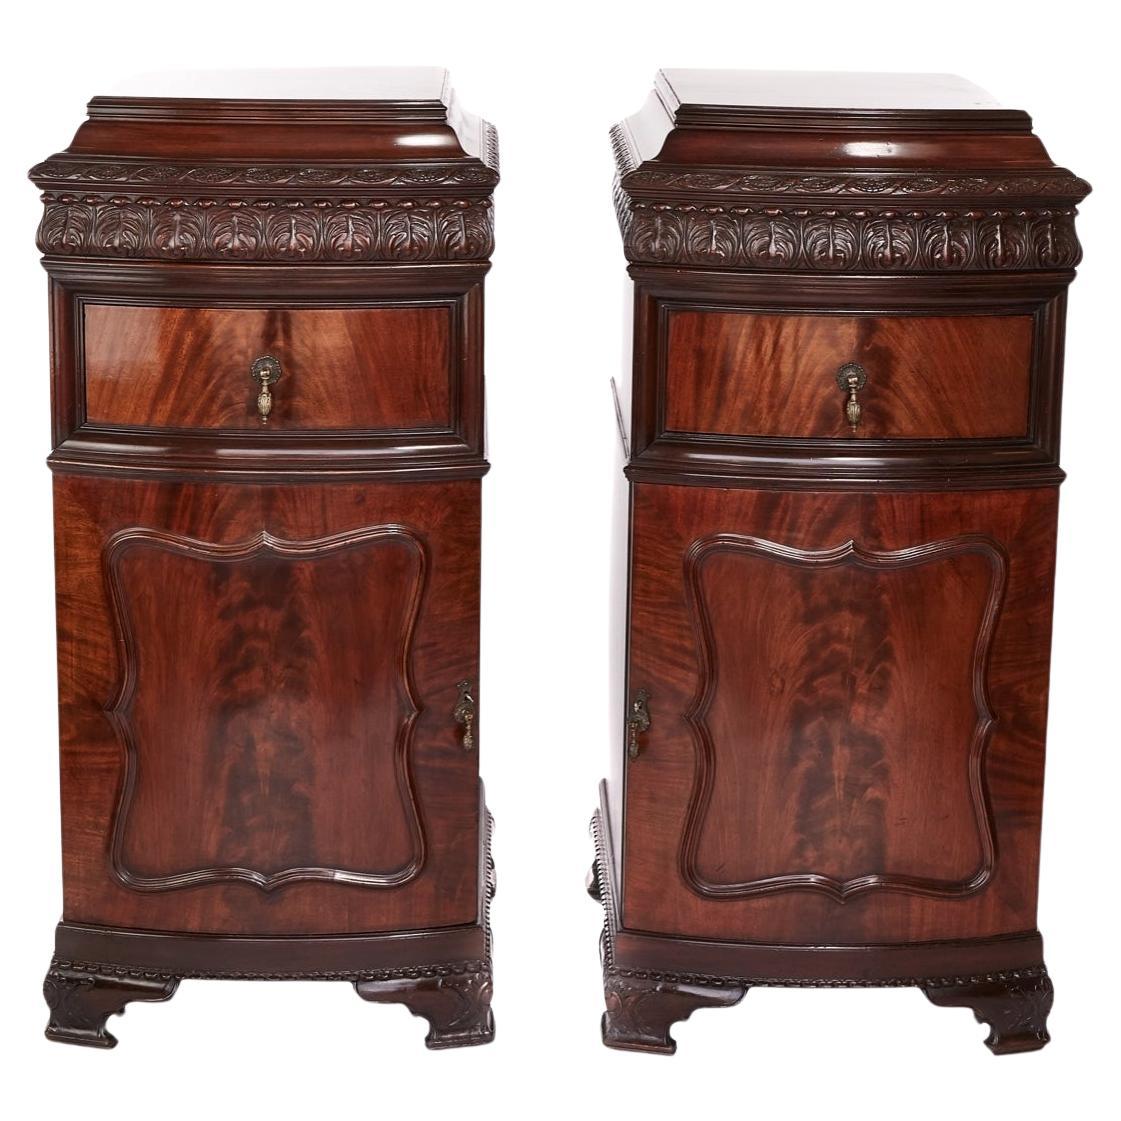 Pair Antique Mahogany carved Pedestal Cupboards